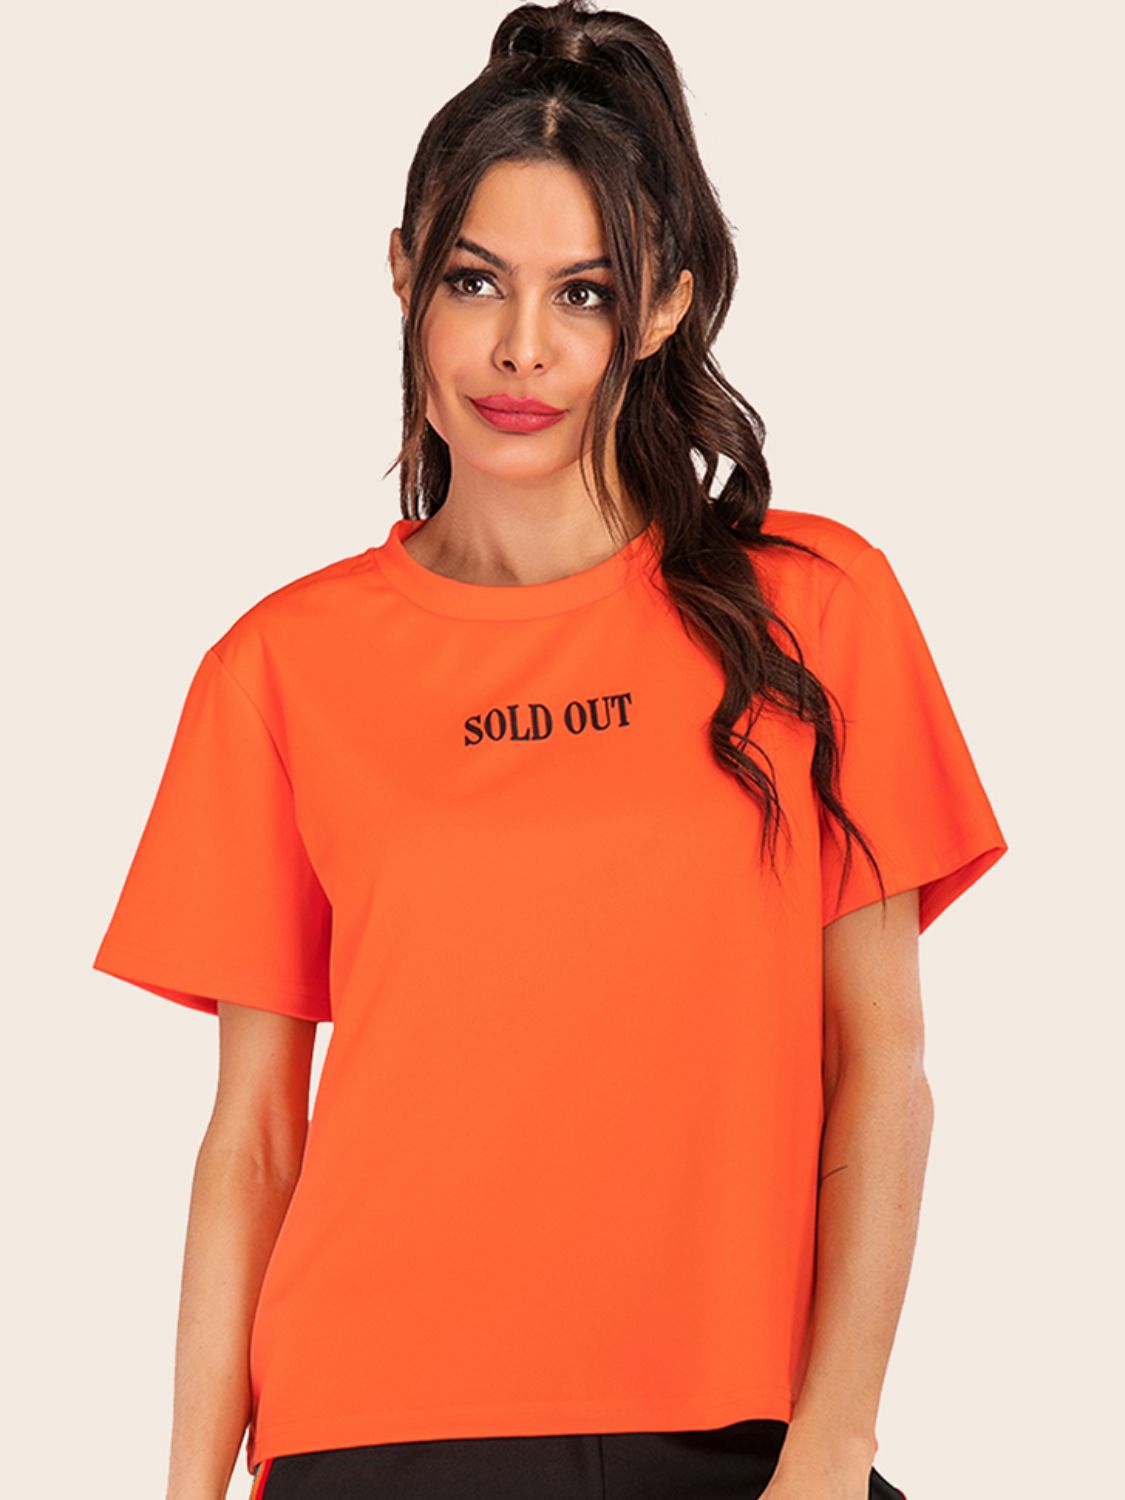 SOLD OUT Graphic Tee - Orange / S - T-Shirts - Shirts & Tops - 1 - 2024